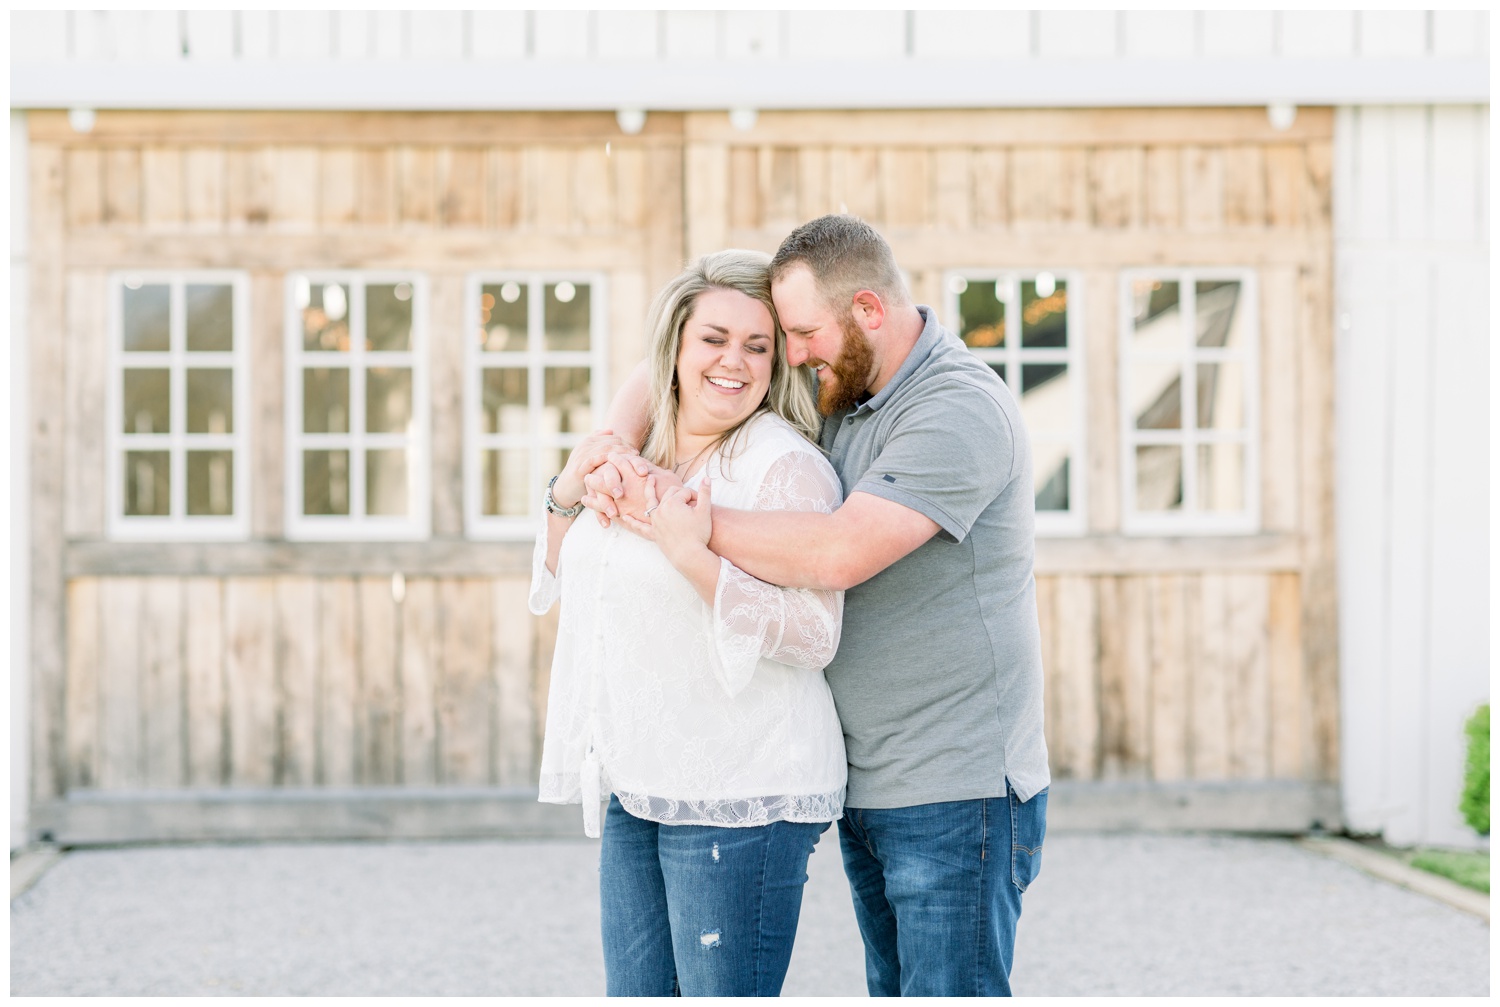 Misty Maple Gardens Barn - Rustic Kentucky Engagement Session